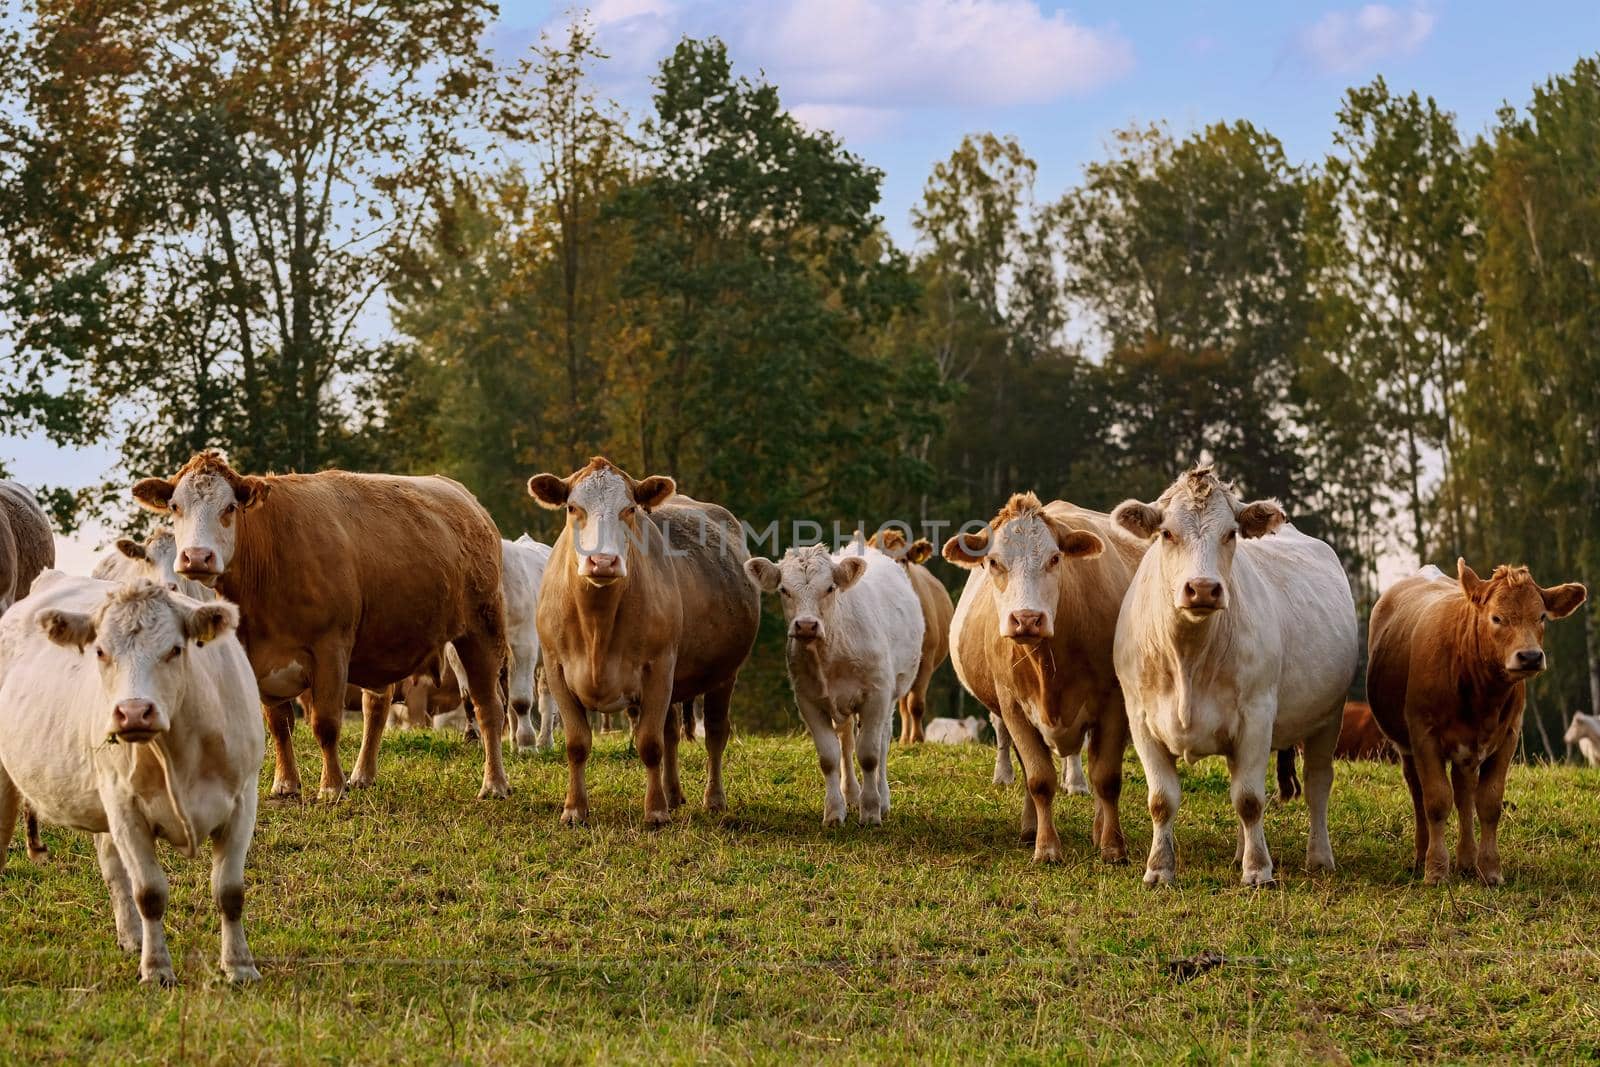 Cows on the pasture in rural area